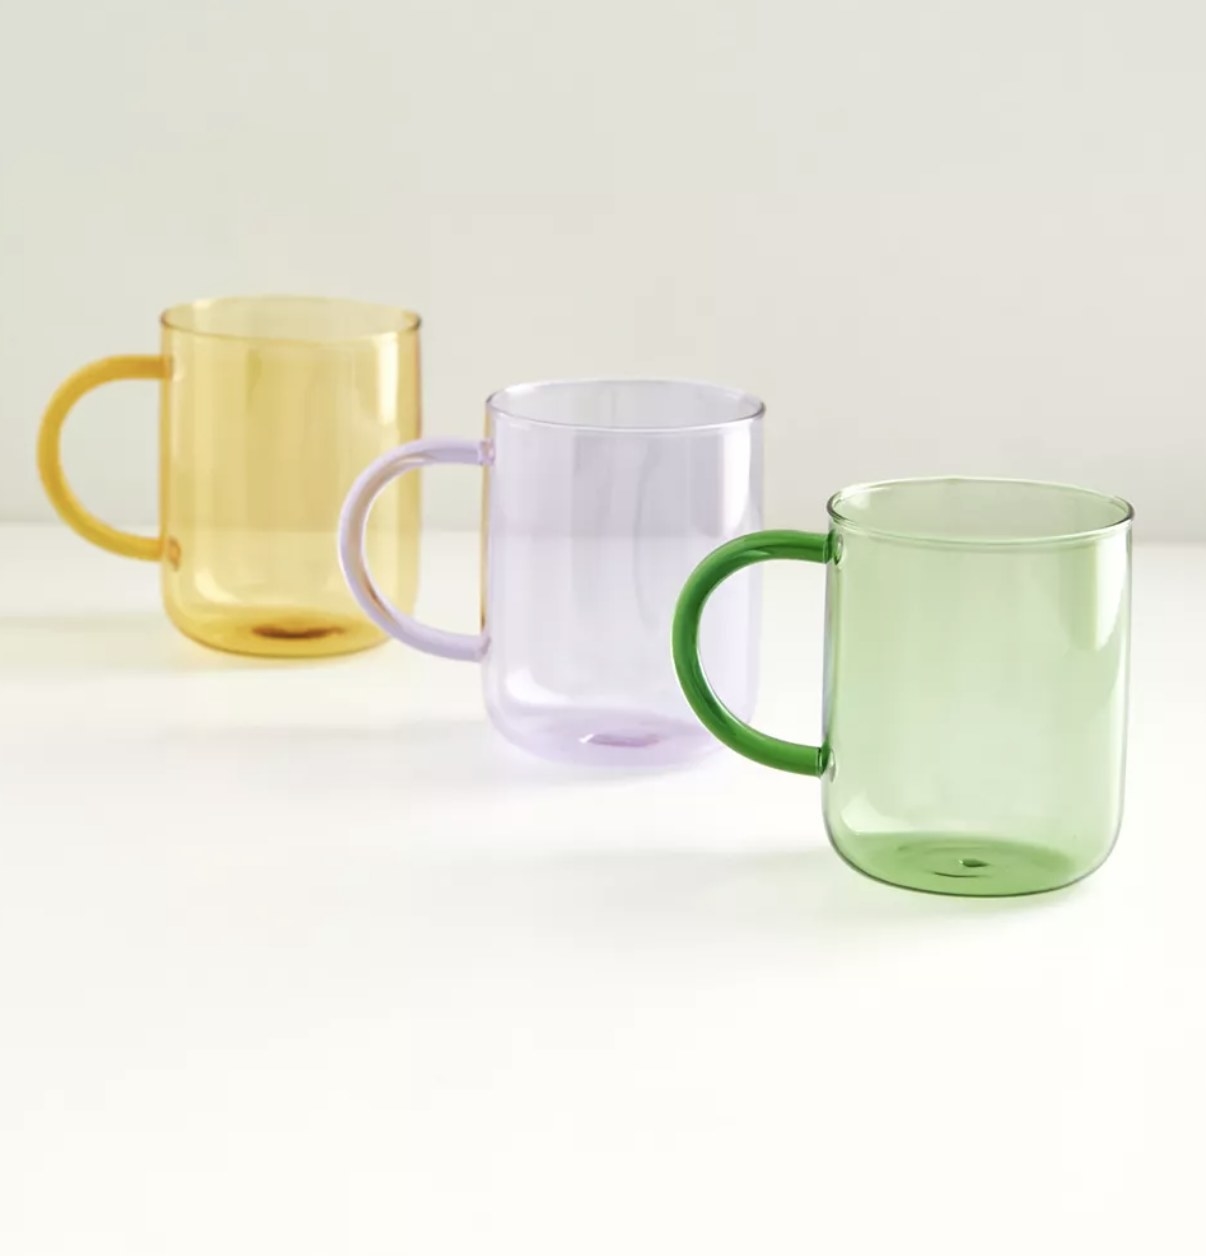 satine tinted glass mugs in three colors